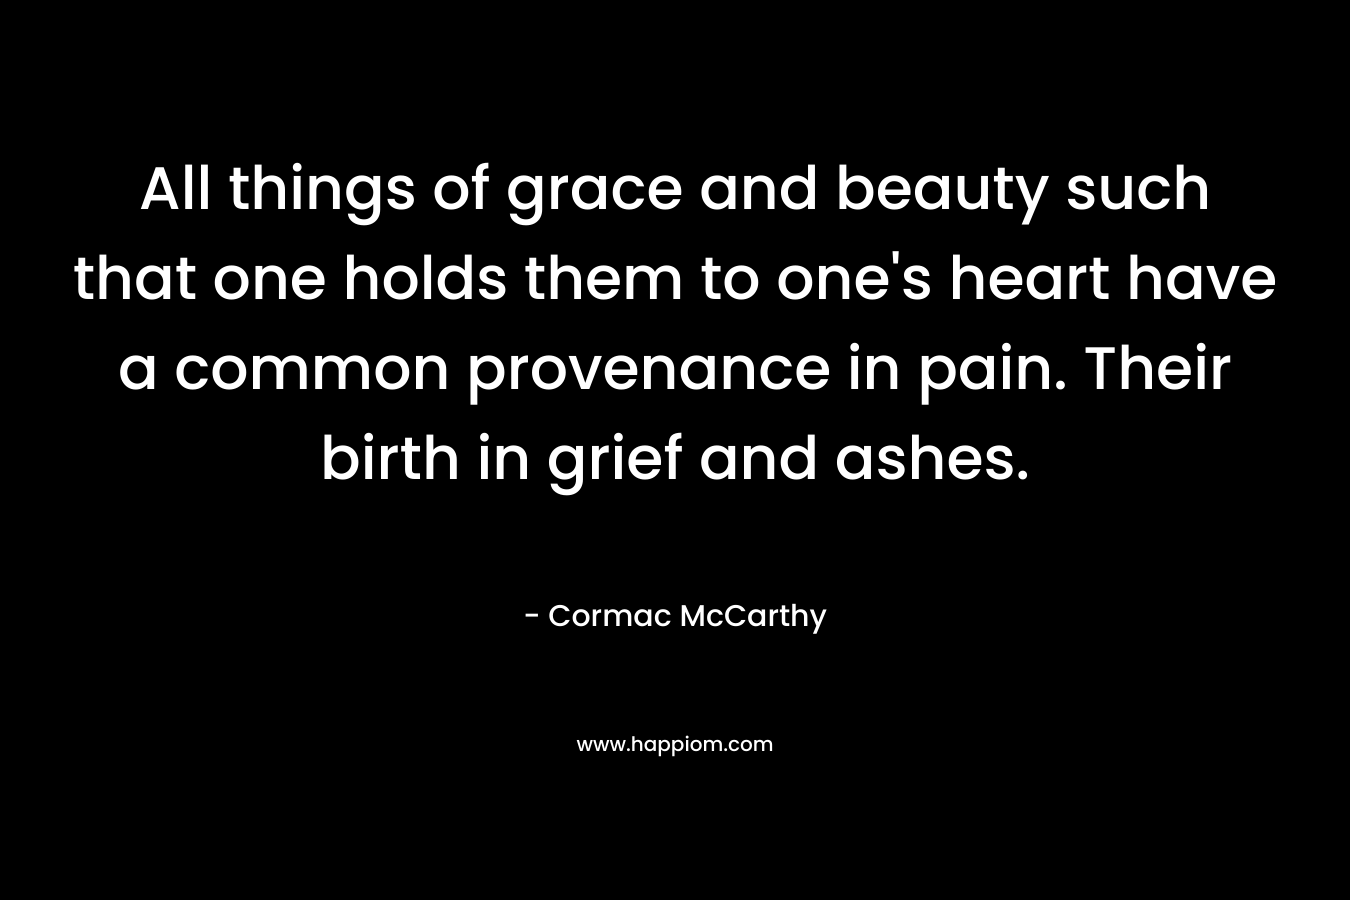 All things of grace and beauty such that one holds them to one’s heart have a common provenance in pain. Their birth in grief and ashes. – Cormac McCarthy